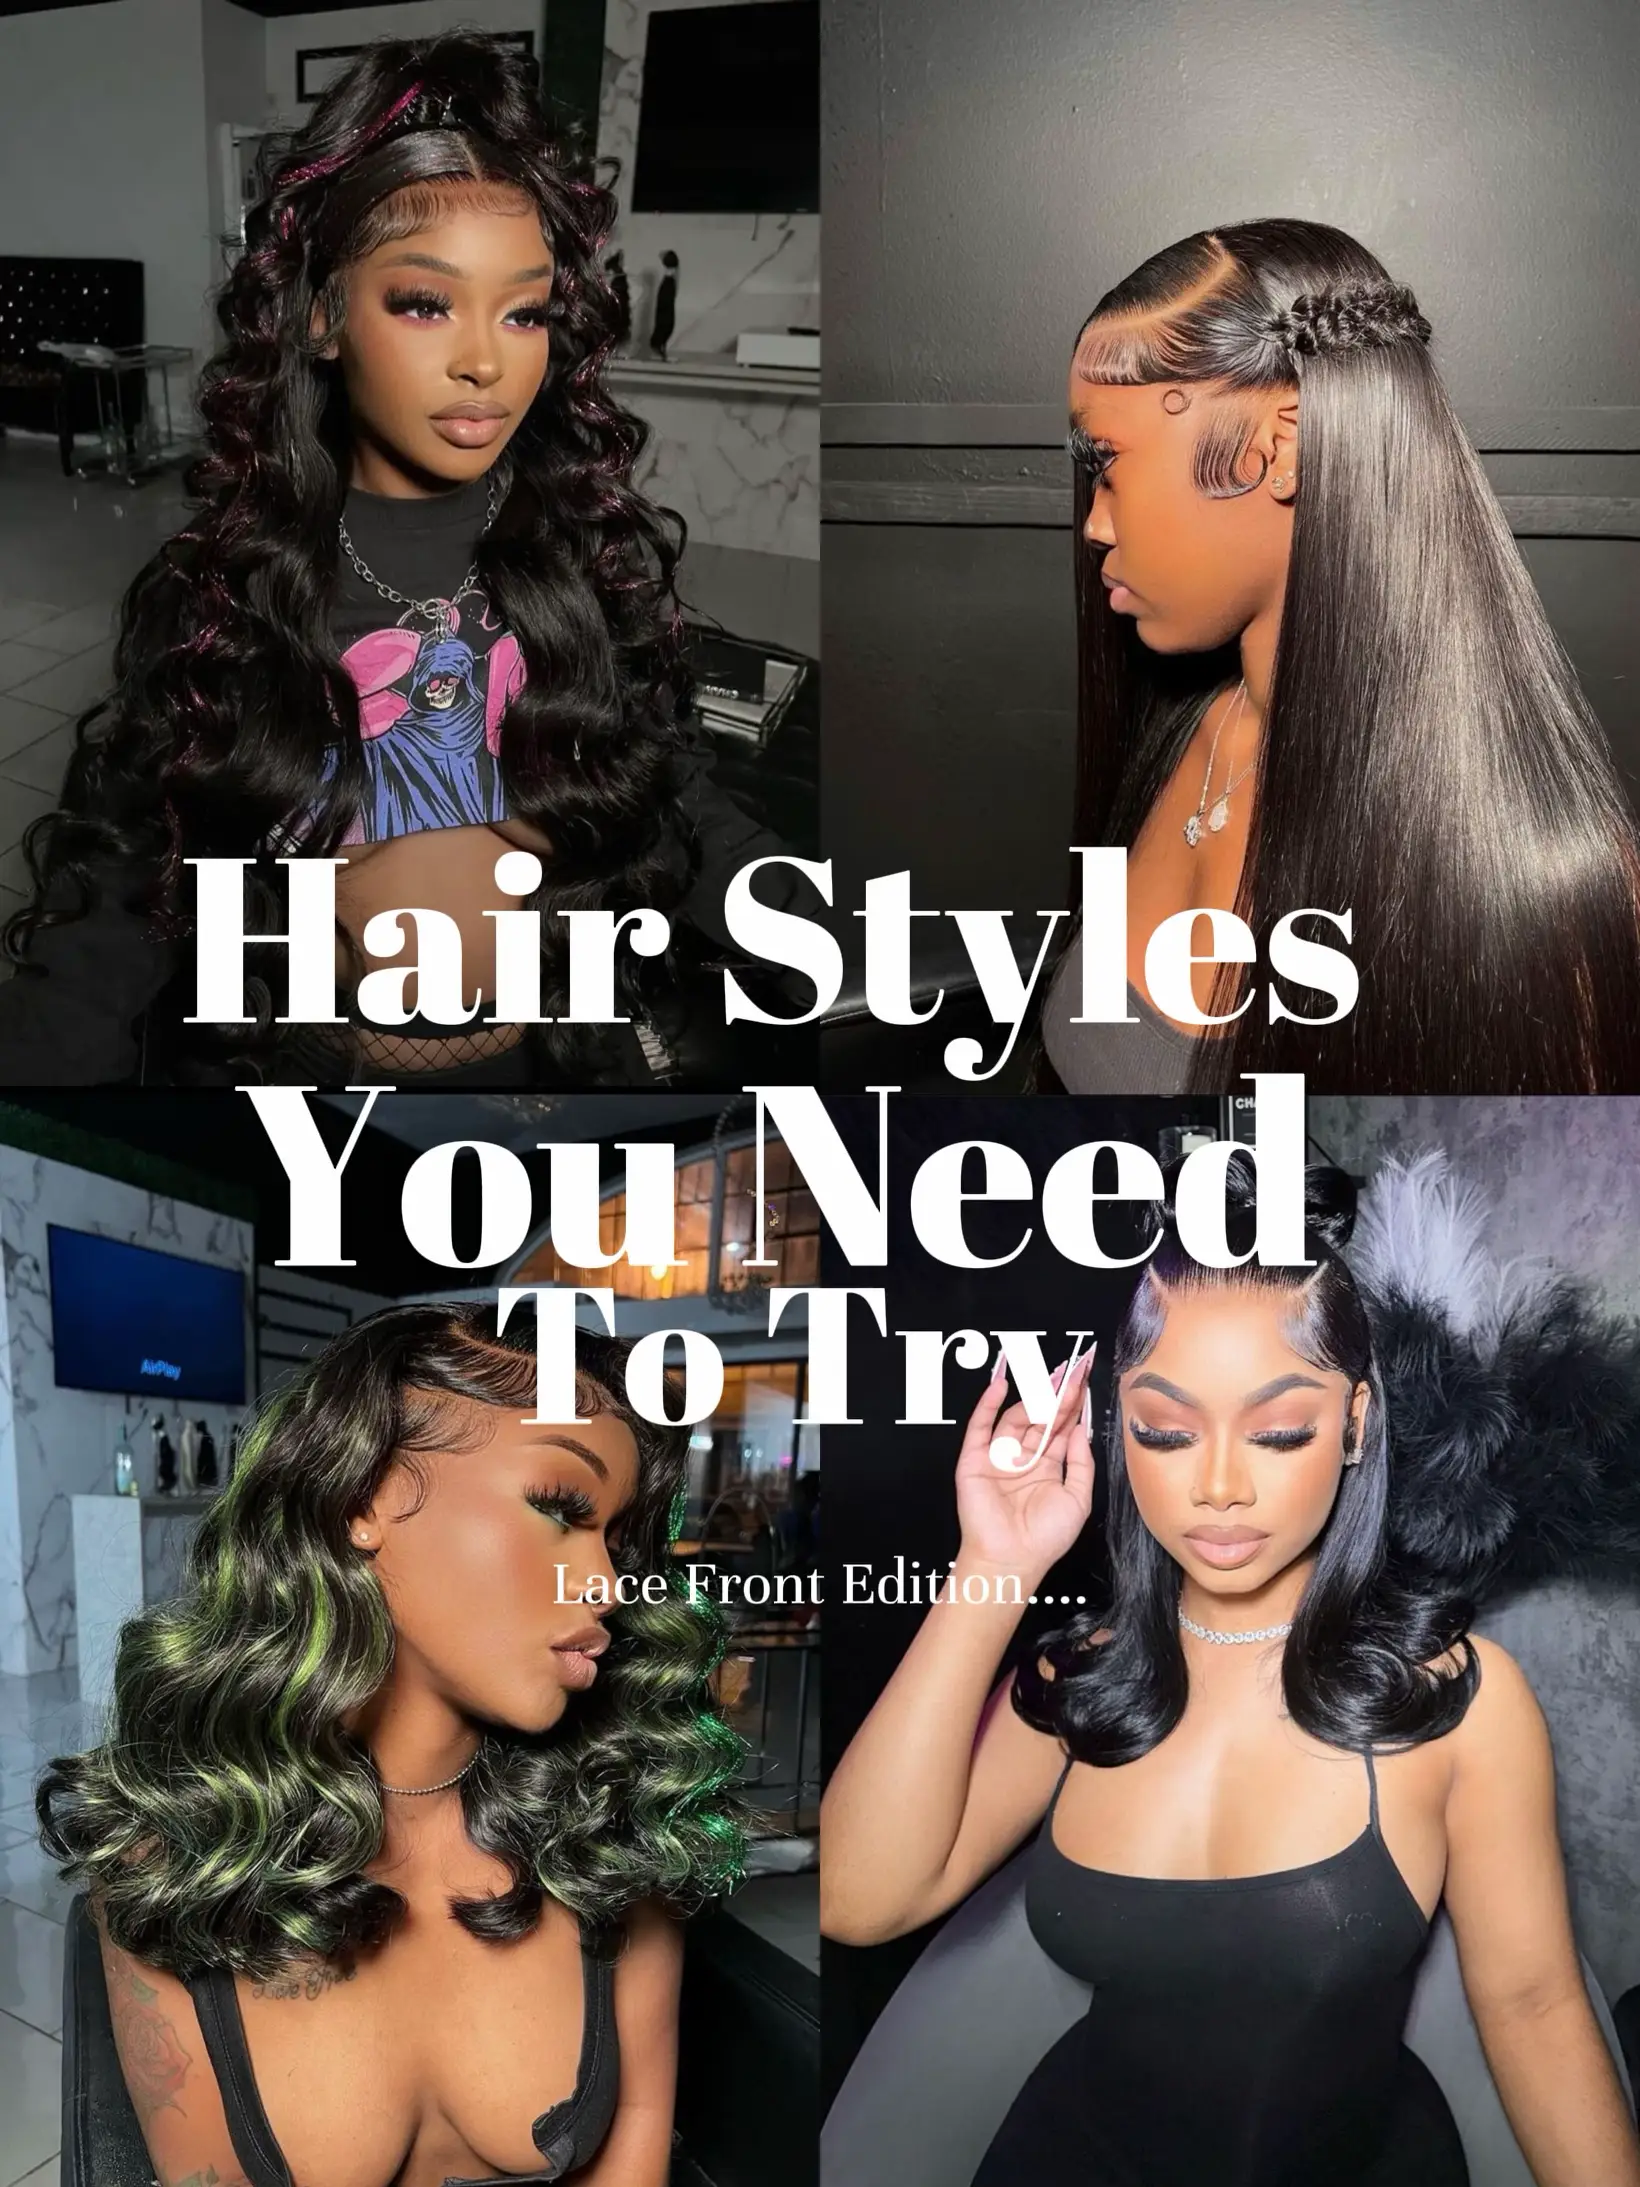 Lux Hair Wow Wigs Long & Luscious - Lace Front - Wigs by